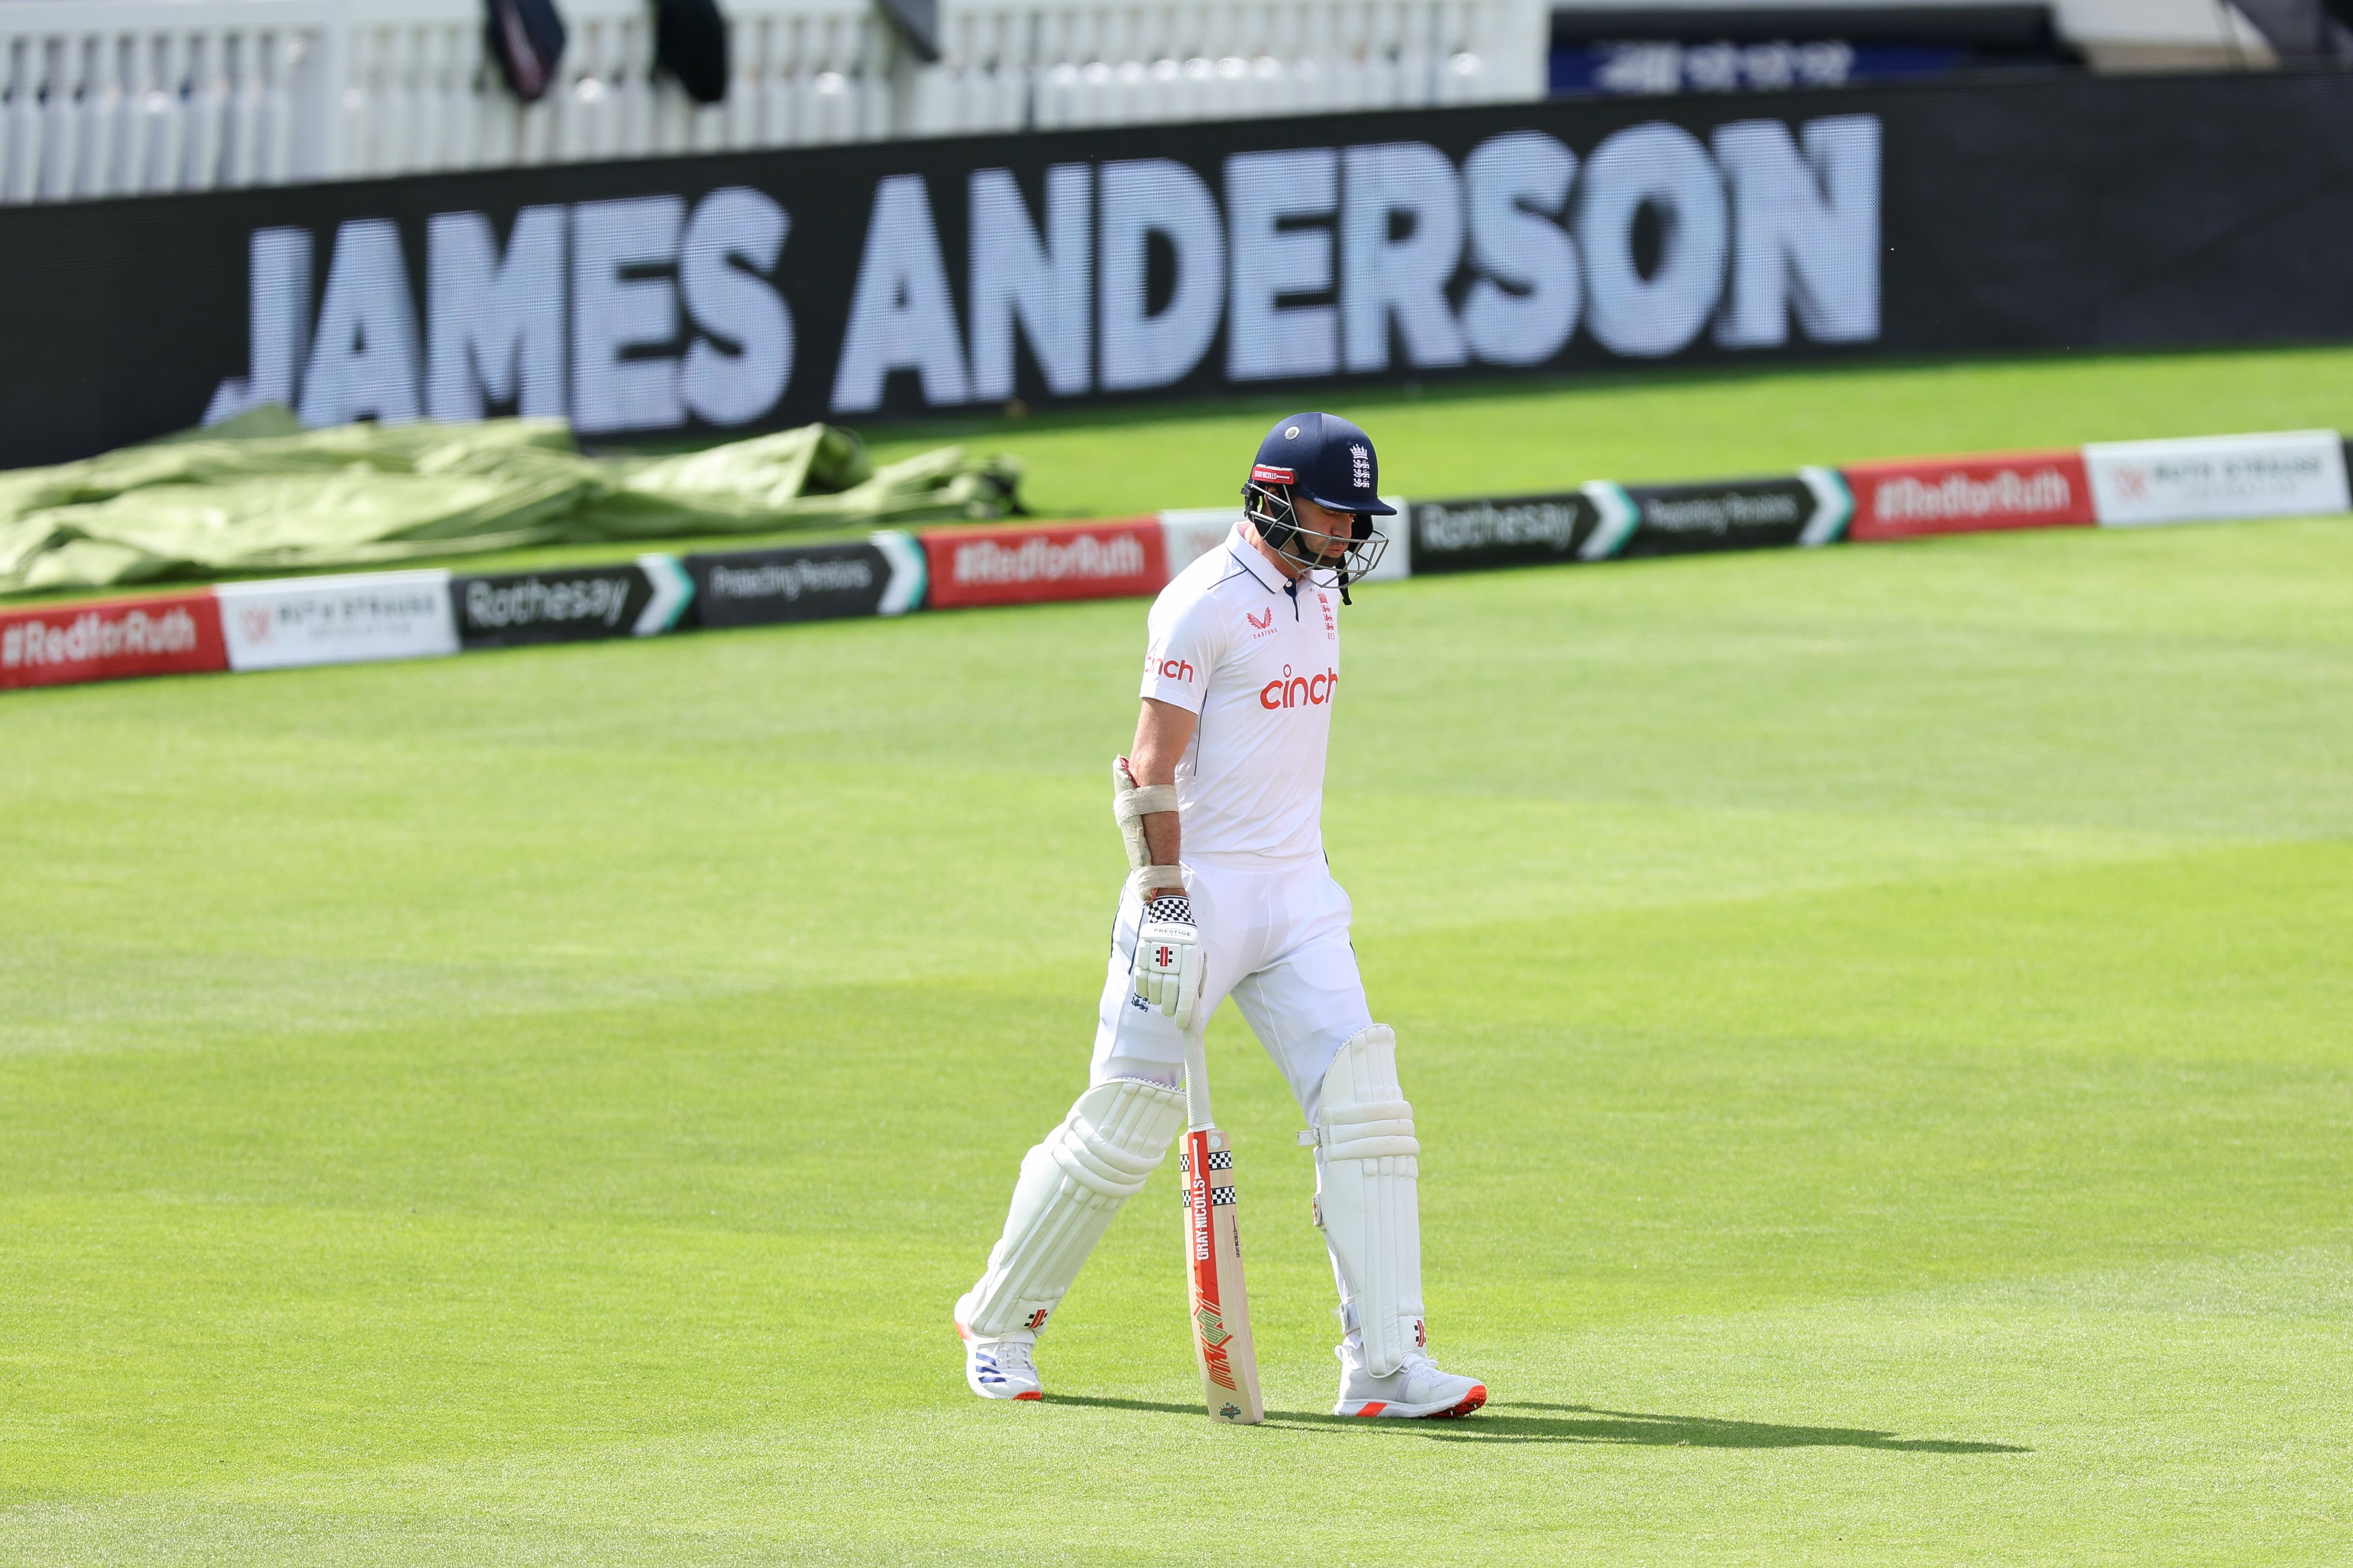 James Anderson walks out to bat for what is likely to be the final time in Test cricket (Steven Paston/PA)